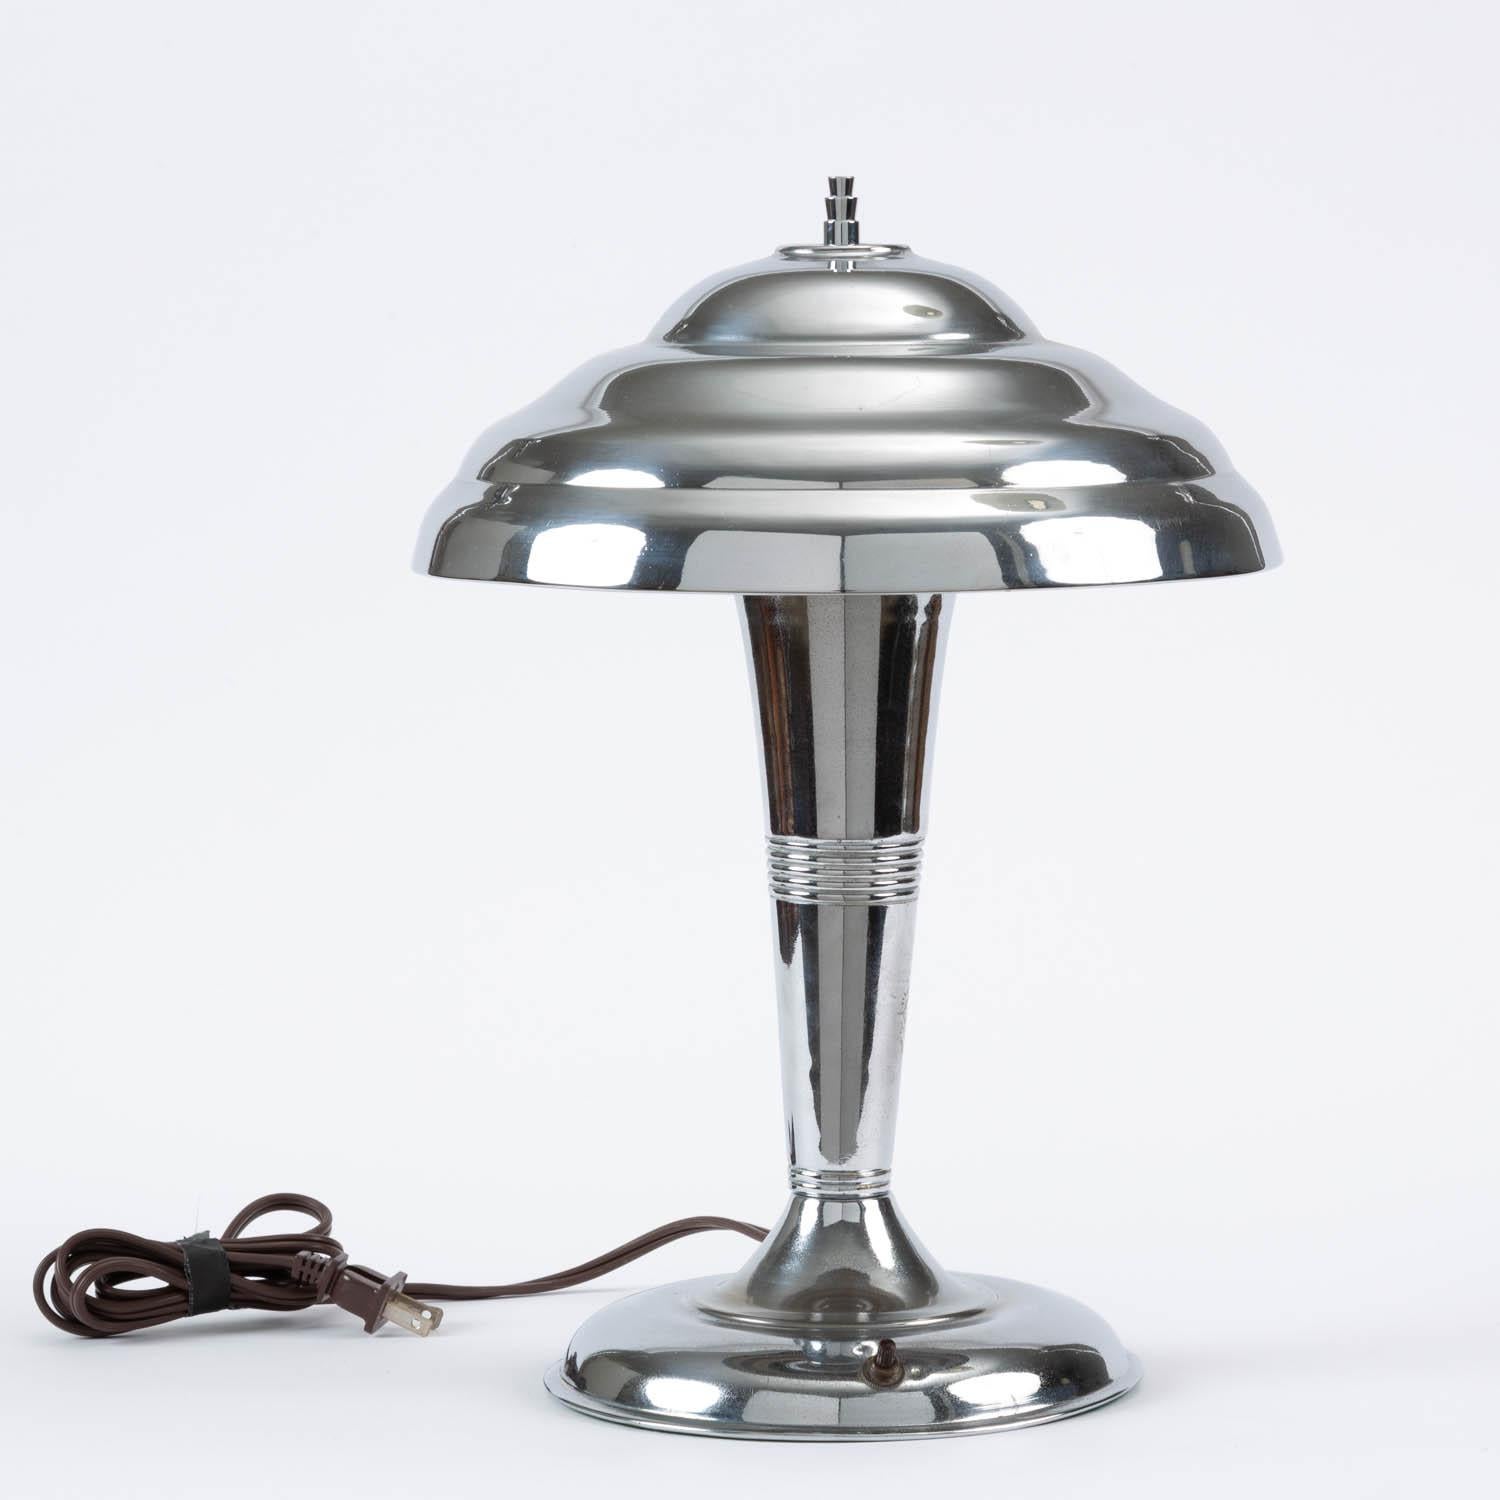 An Atomic Age / Art Deco table or desk lamp with an attached saucer shade made from chrome-plated spun steel. Lamp has been professional rewired.

Condition: Good vintage condition; professionally cleaned and rewired. Some pitting on